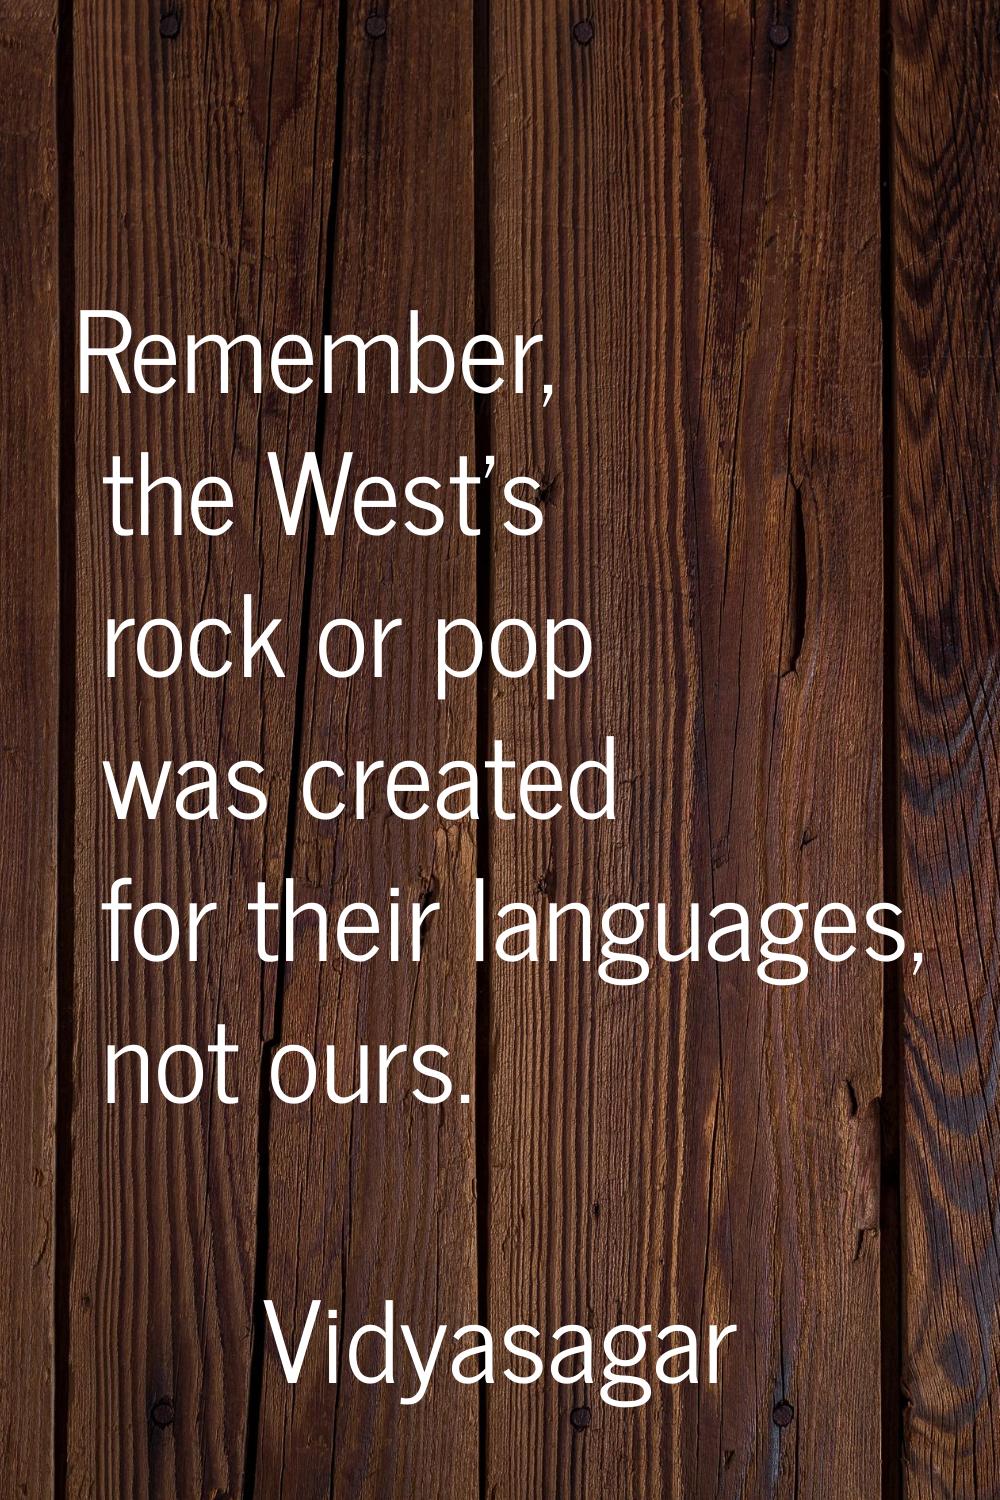 Remember, the West's rock or pop was created for their languages, not ours.